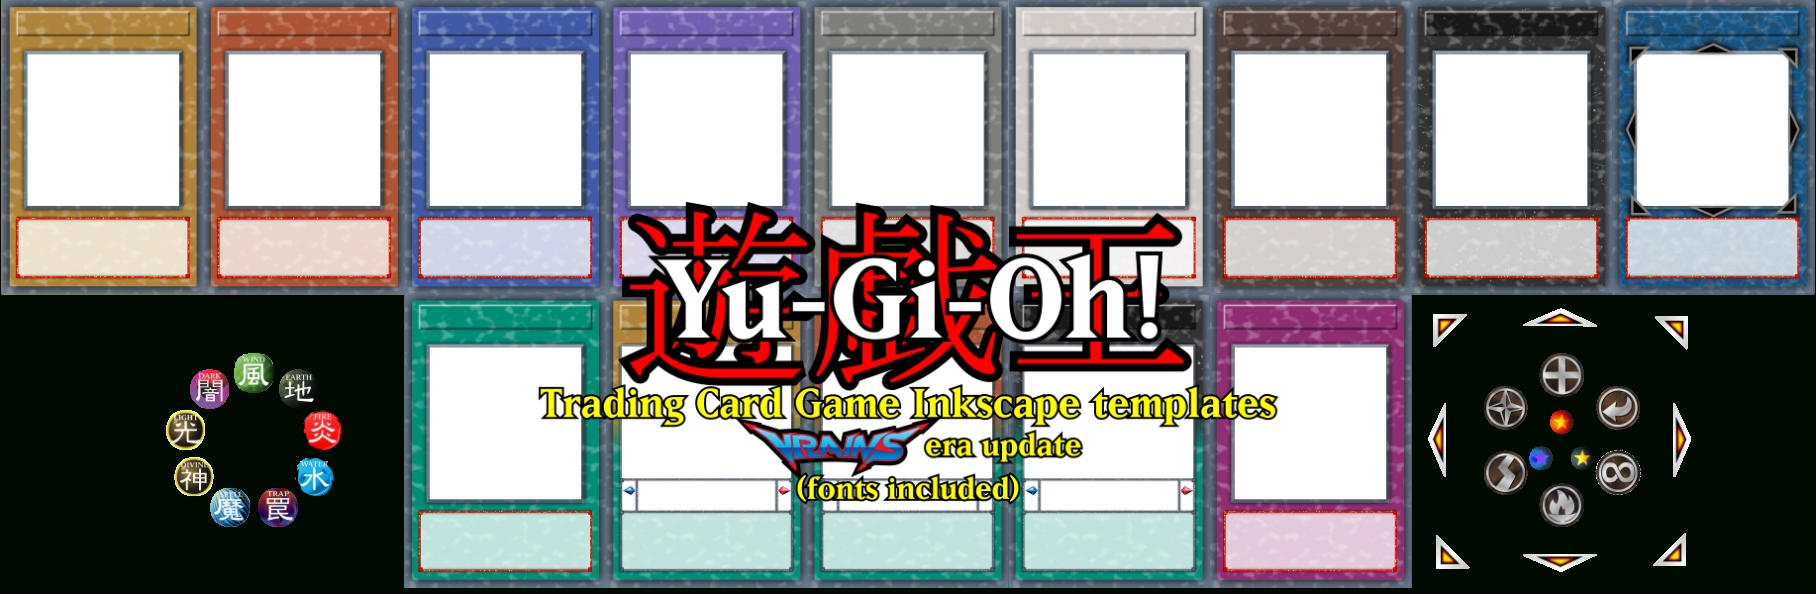 Yu Gi Oh! Tcg Card Templates (Vrains Era Update) By Decatilde On Deviantart With Yugioh Card Template